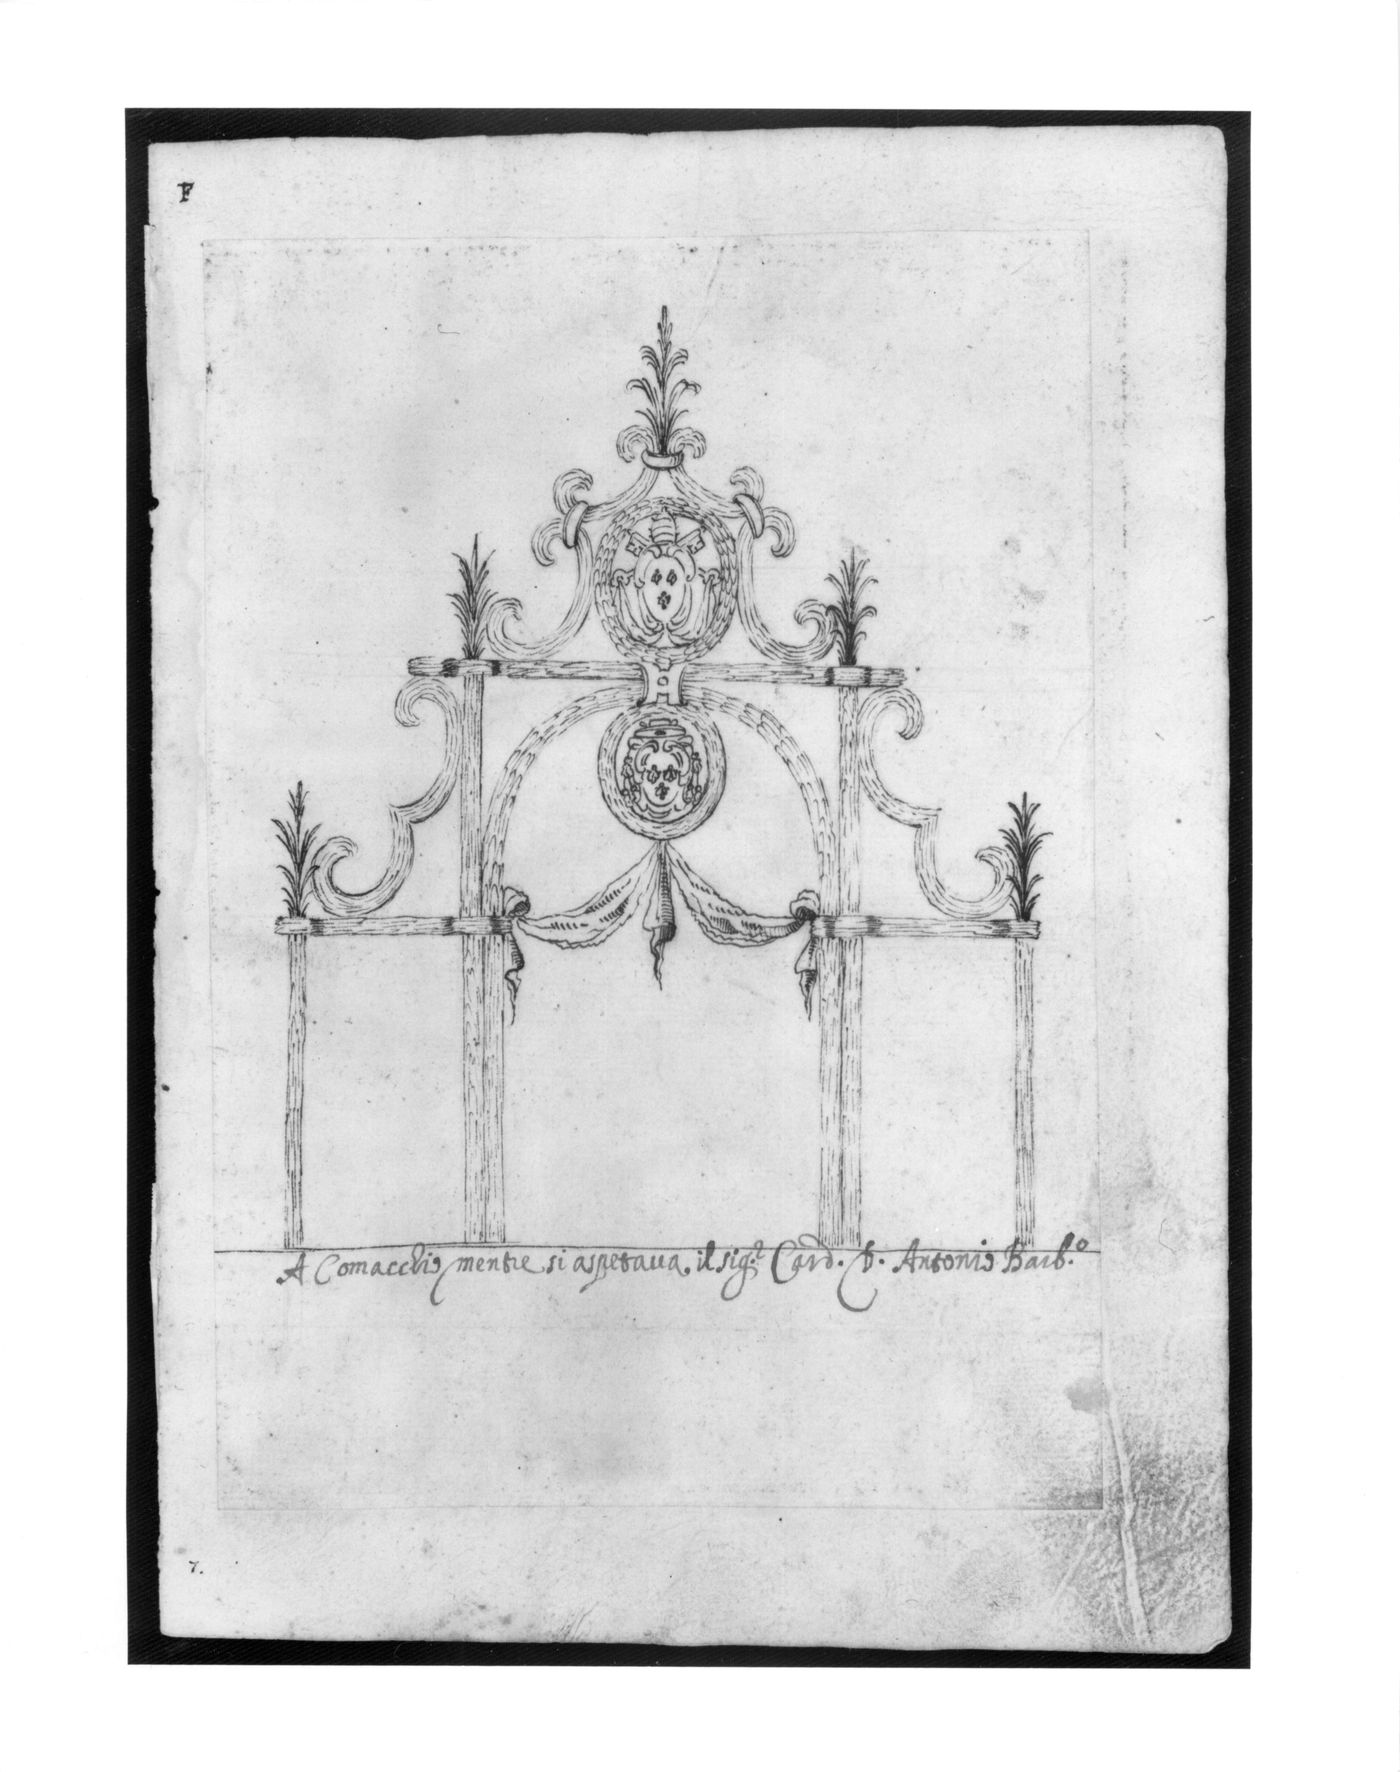 Elevation of a triumphal arch at Comacchio surmounted by the coats of arms of Pope Urban VIII Barberini and Cardinal Pietro Antonio Barberini